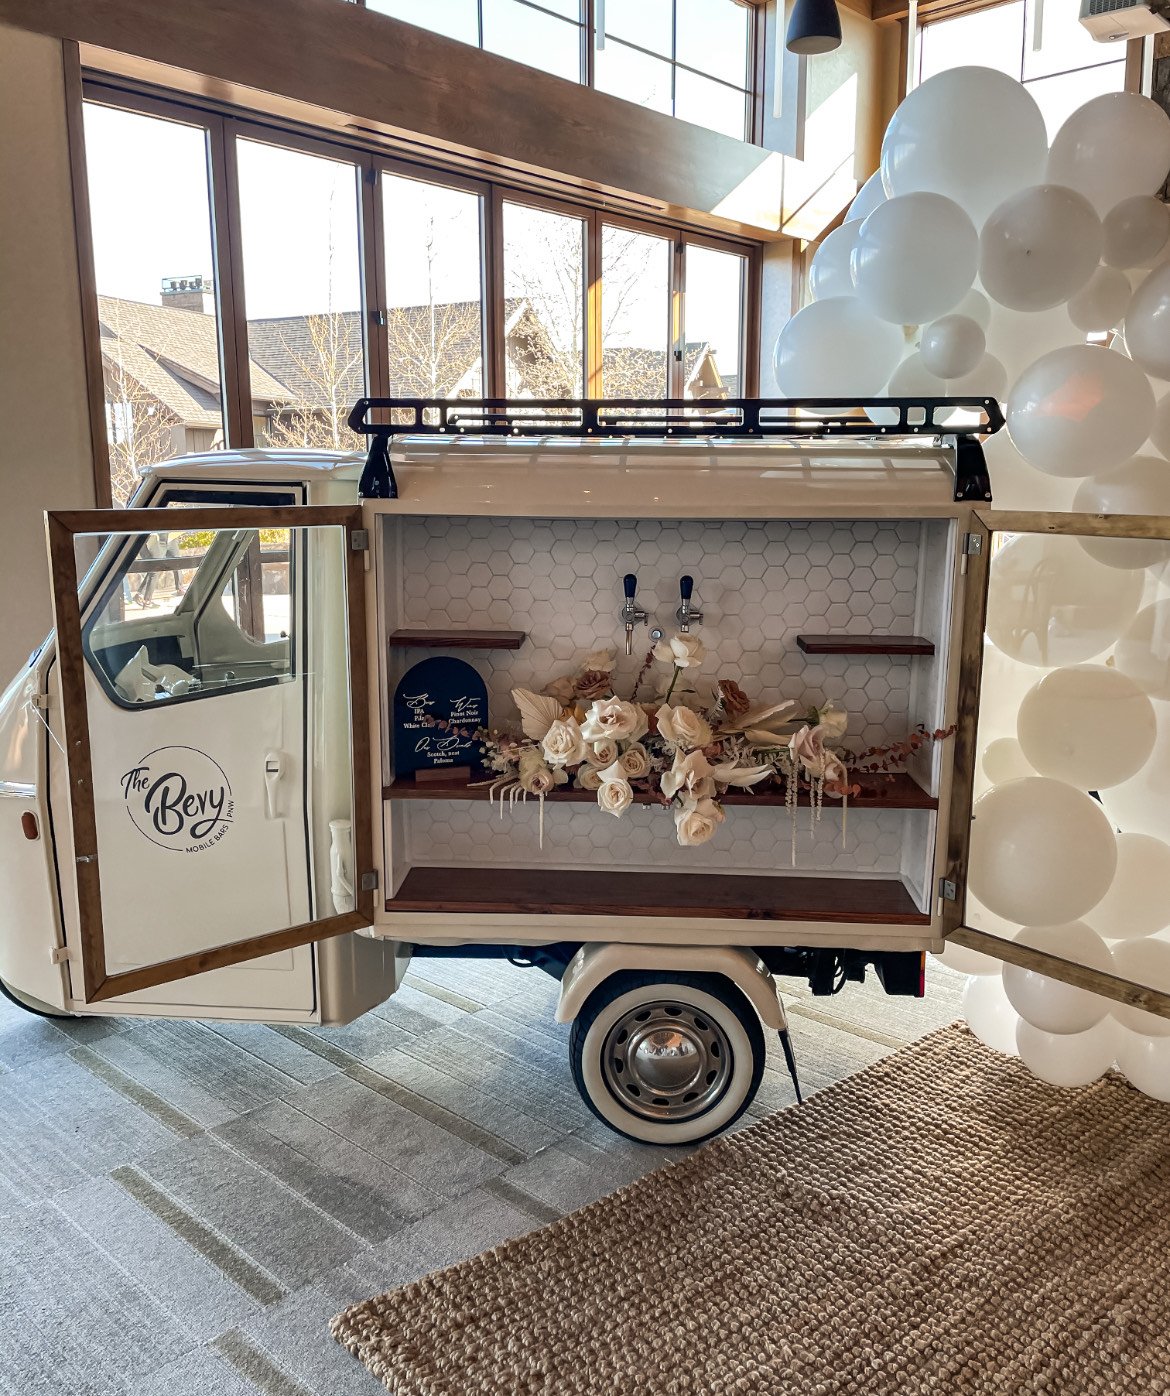 White Vintage Italian cart turned into a mobile bar cart is surrounded by white balloons